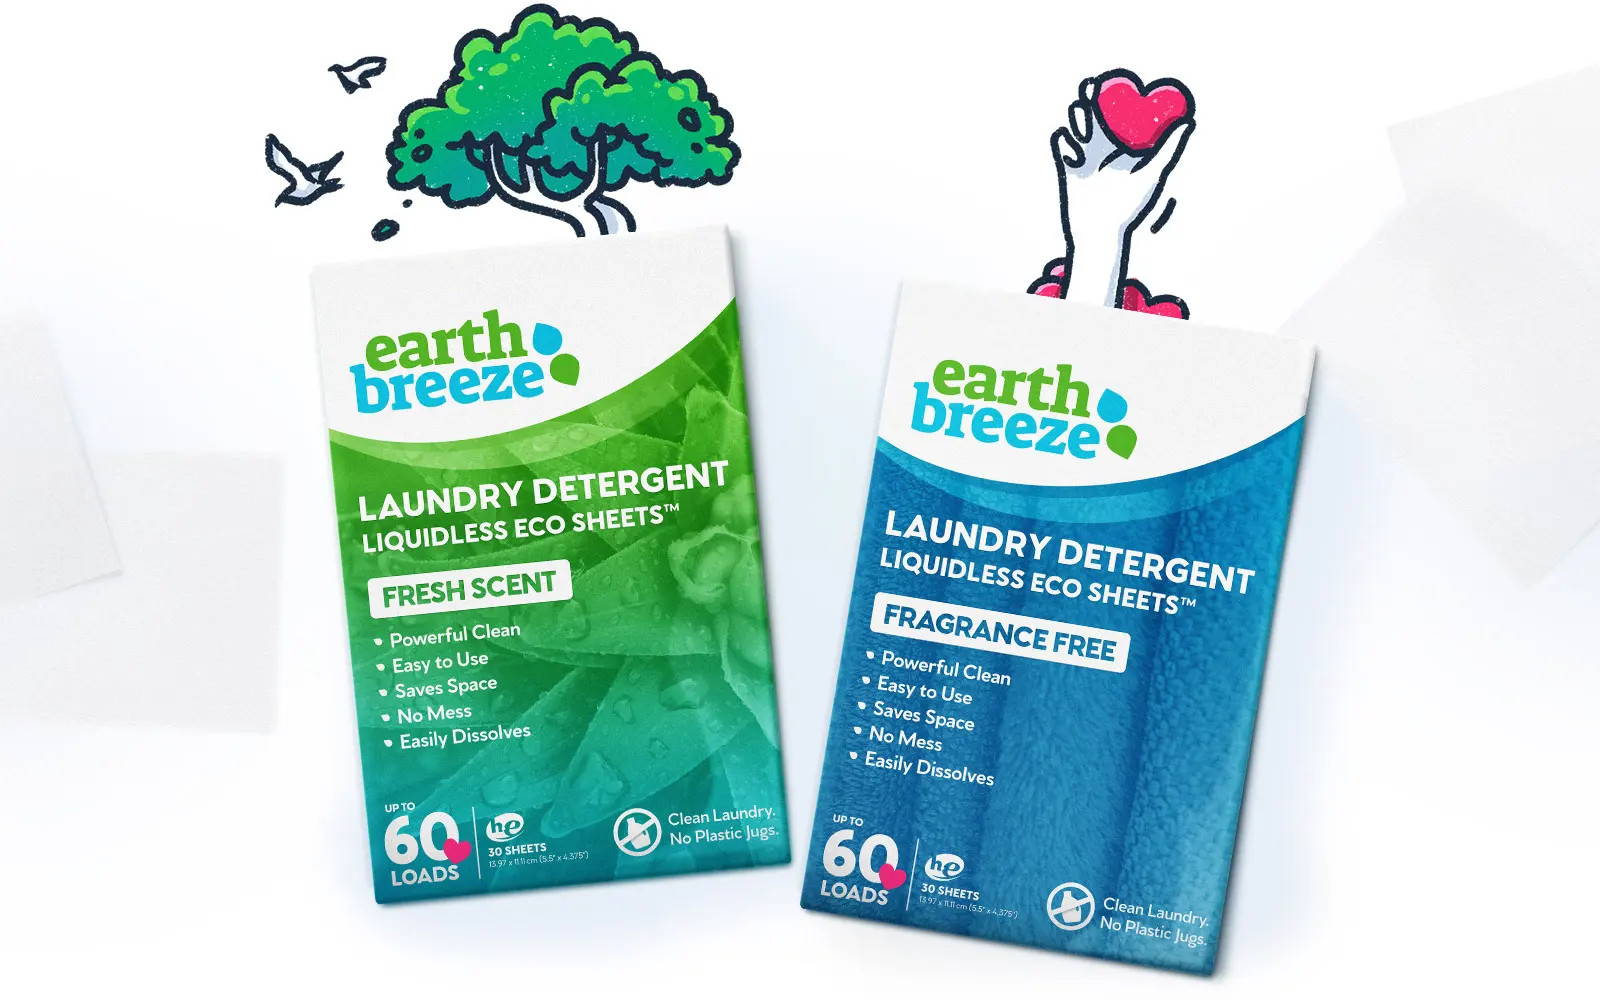 For National Laundry Day 2022, shop these items from